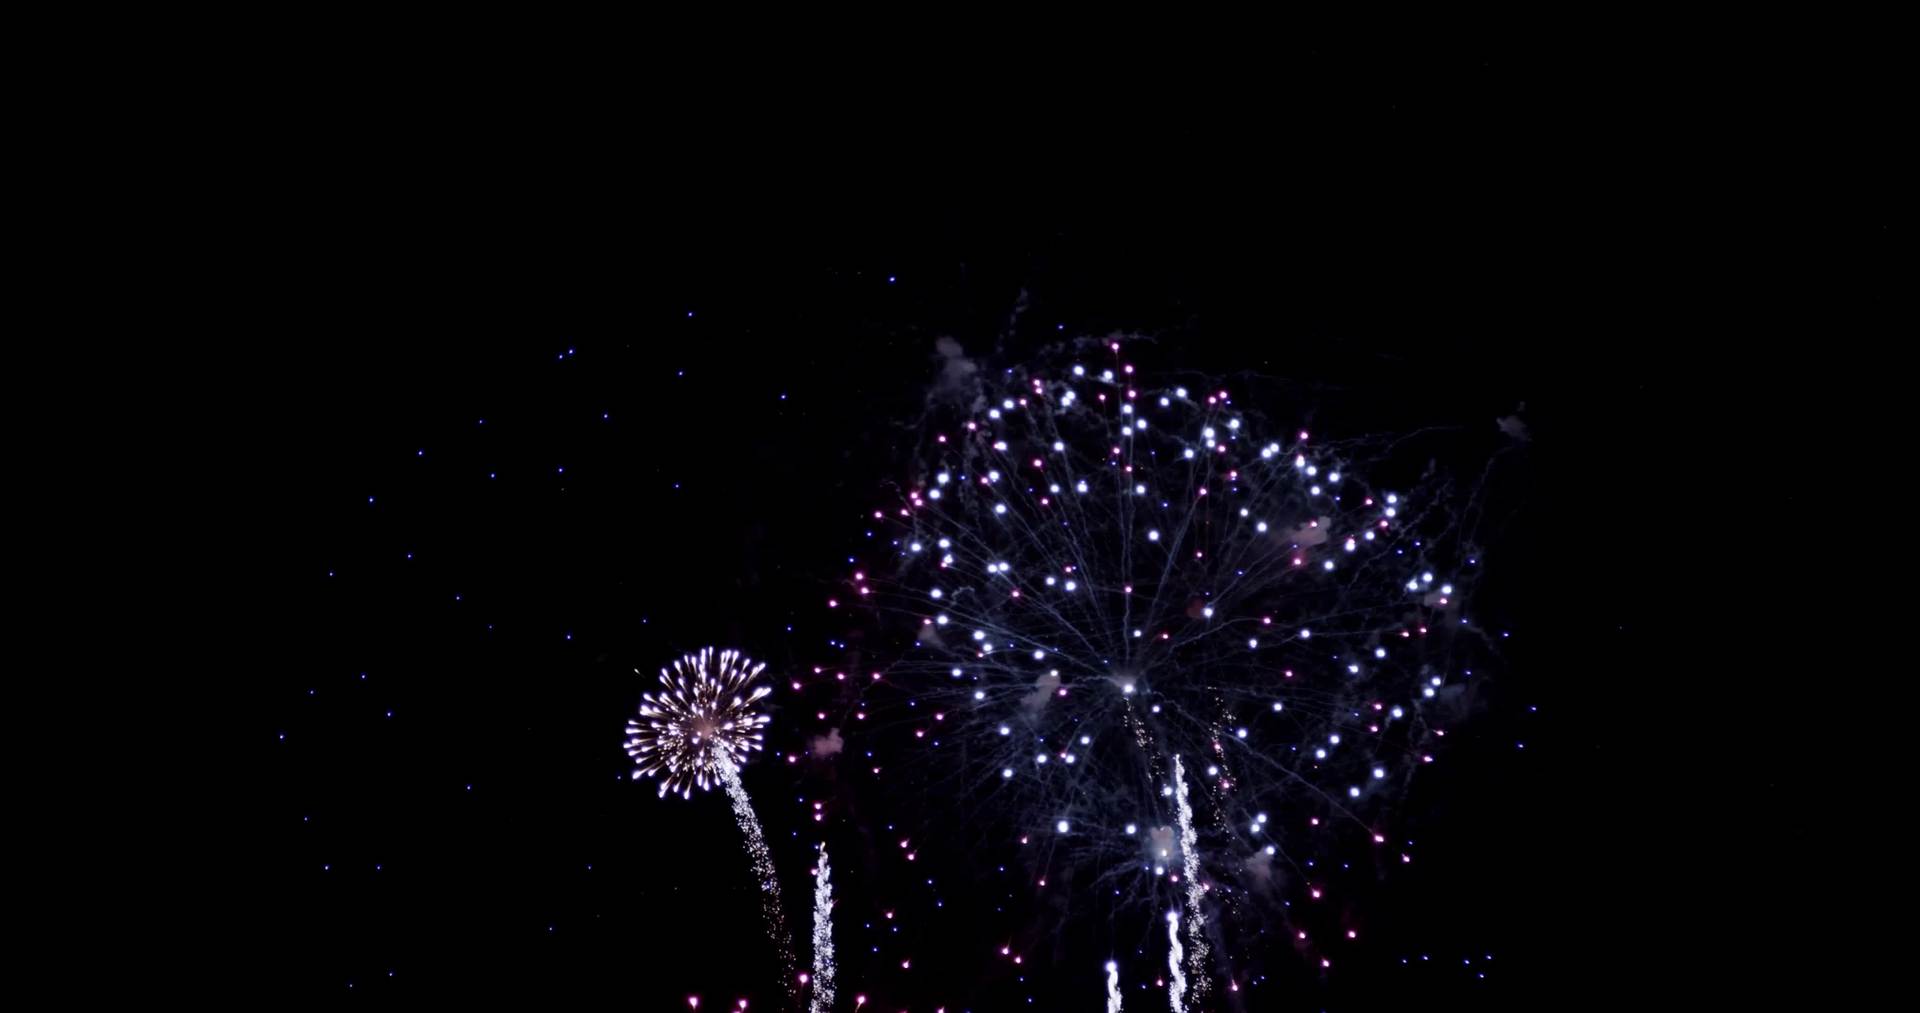 Colorful night scene of many fireworks in 4K - Free HD Video Clips ...